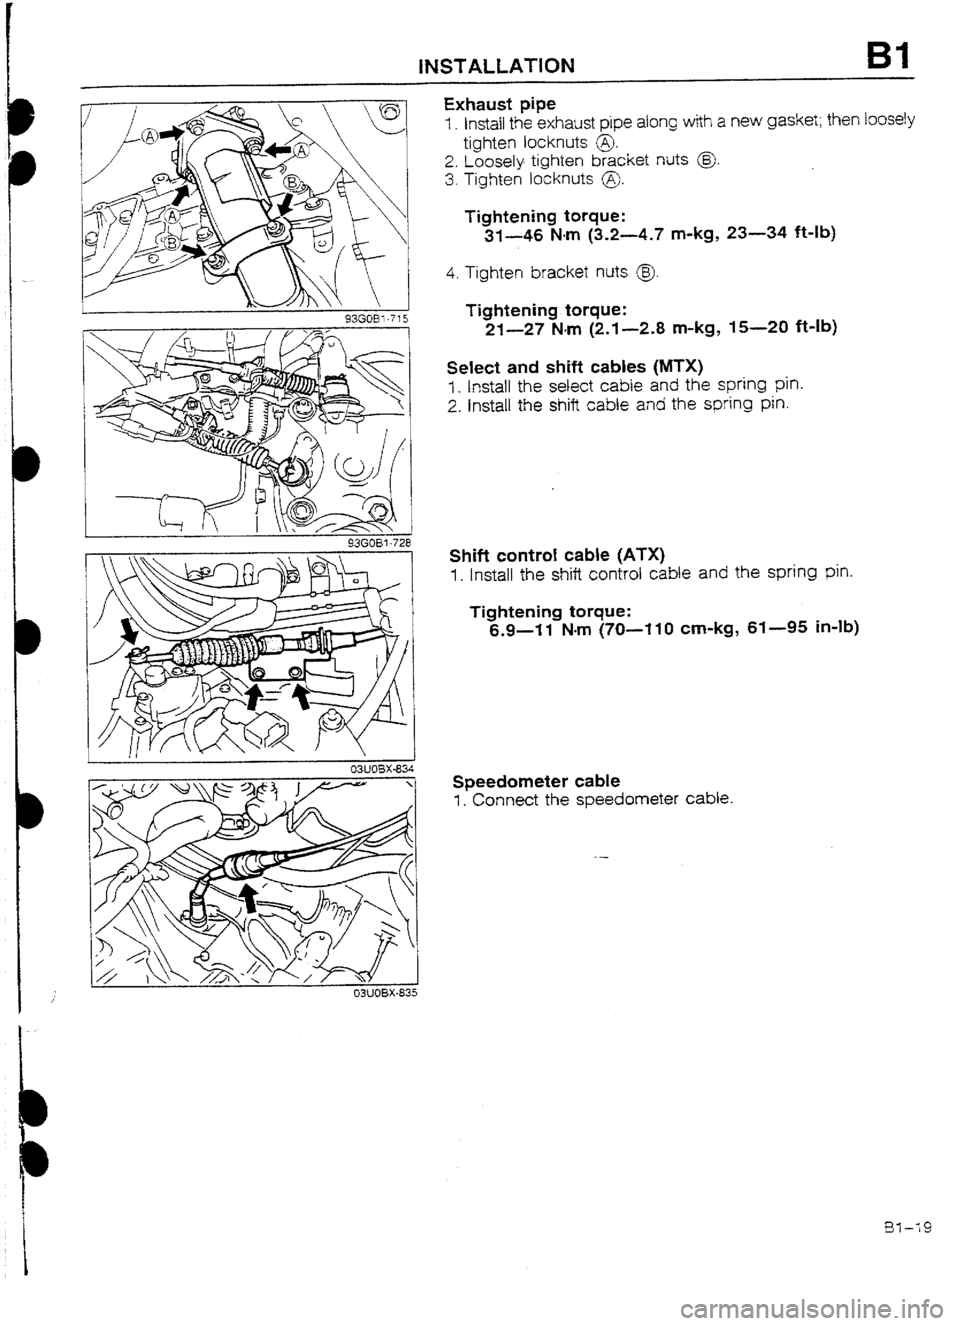 MAZDA 232 1990   Suplement Service Manual -- 
D 
b 
D 
1 
I 
1 
( 
I 
INSTALLATION Bl 
Exhaust pipe 
I. Instail the exhaust pipe along with a new gasket; then loosely 
tighten locknuts @. 
2. Loosely tighten bracket nuts @ 
3. Tighten locknut